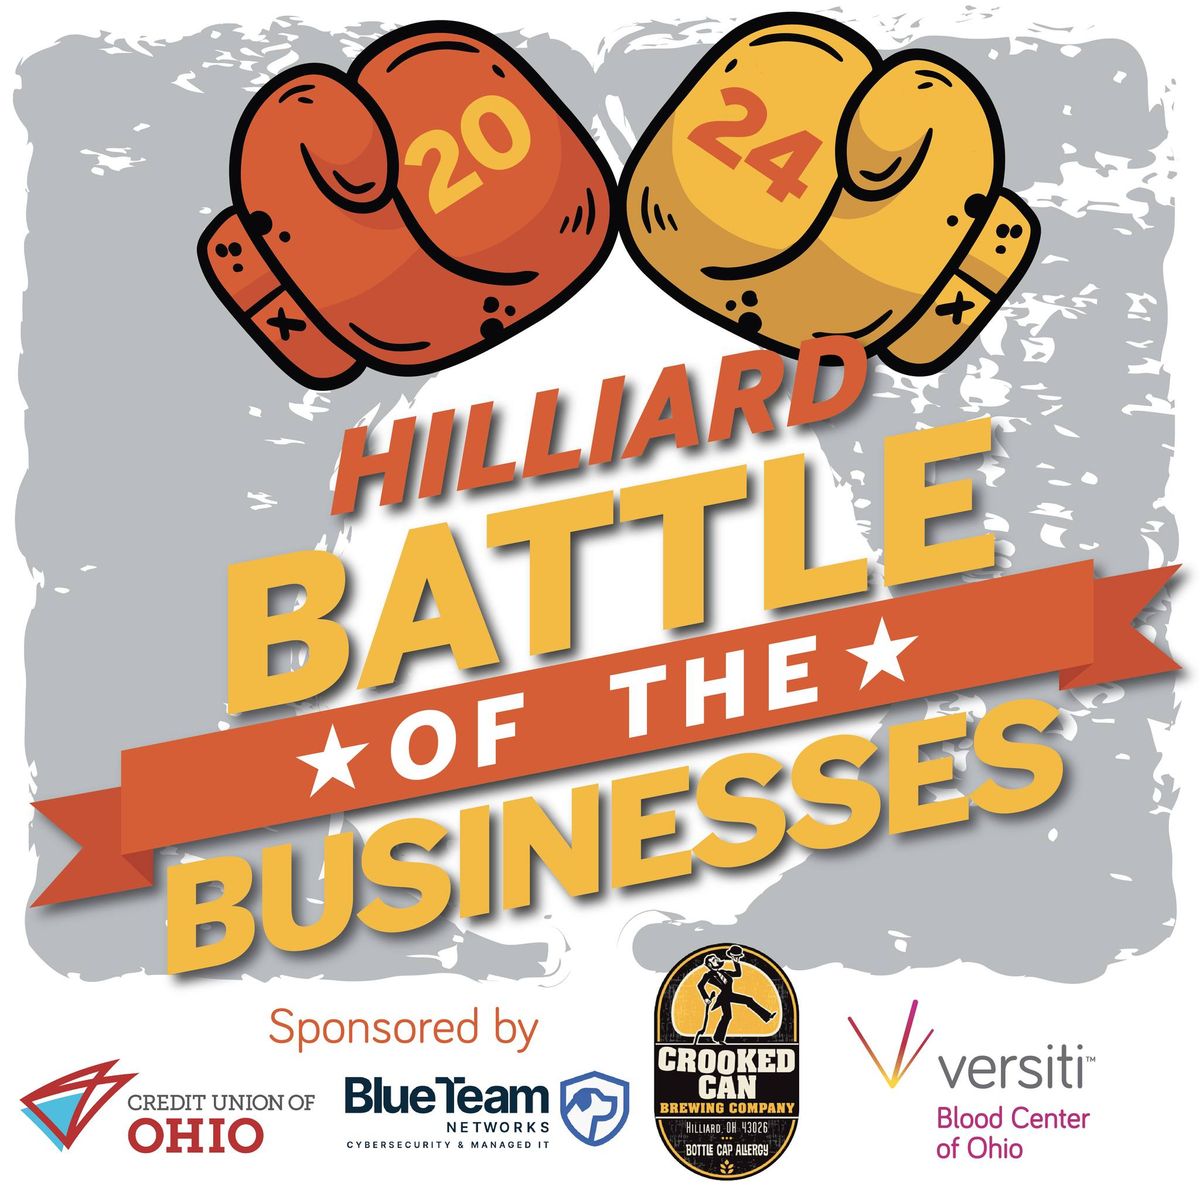 Hilliard Battle of the Businesses